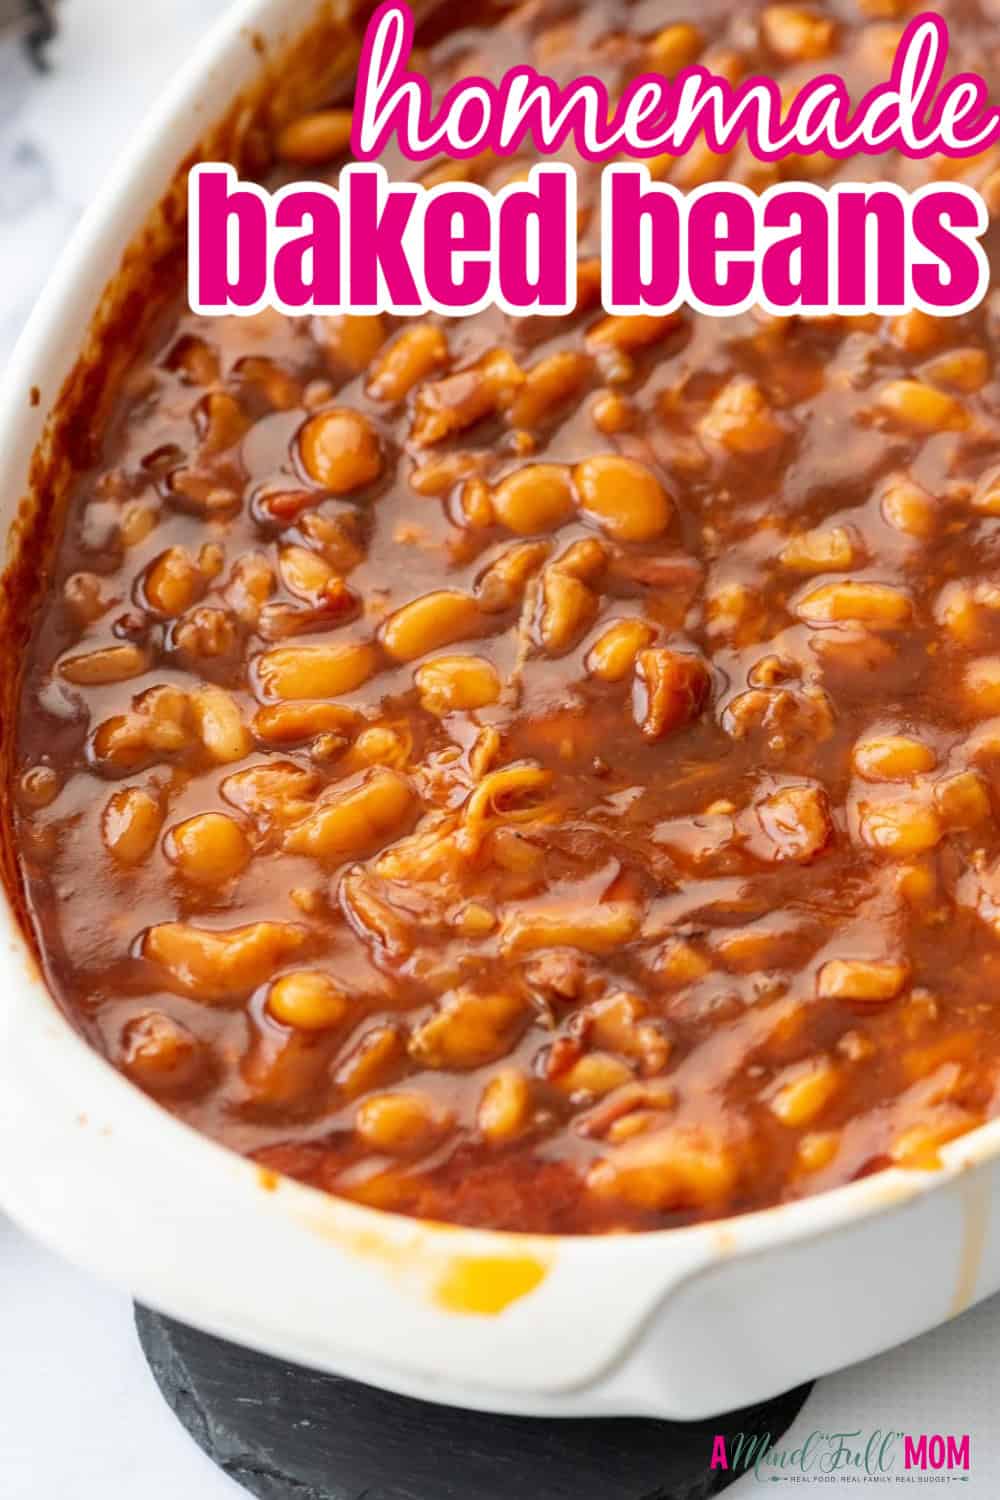 These Old Fashioned Baked Beans are made from scratch with a sweet and savory sauce. This heirloom homemade baked beans recipe has been in my family for generations and guarantees the BEST Baked Beans you will ever have! 